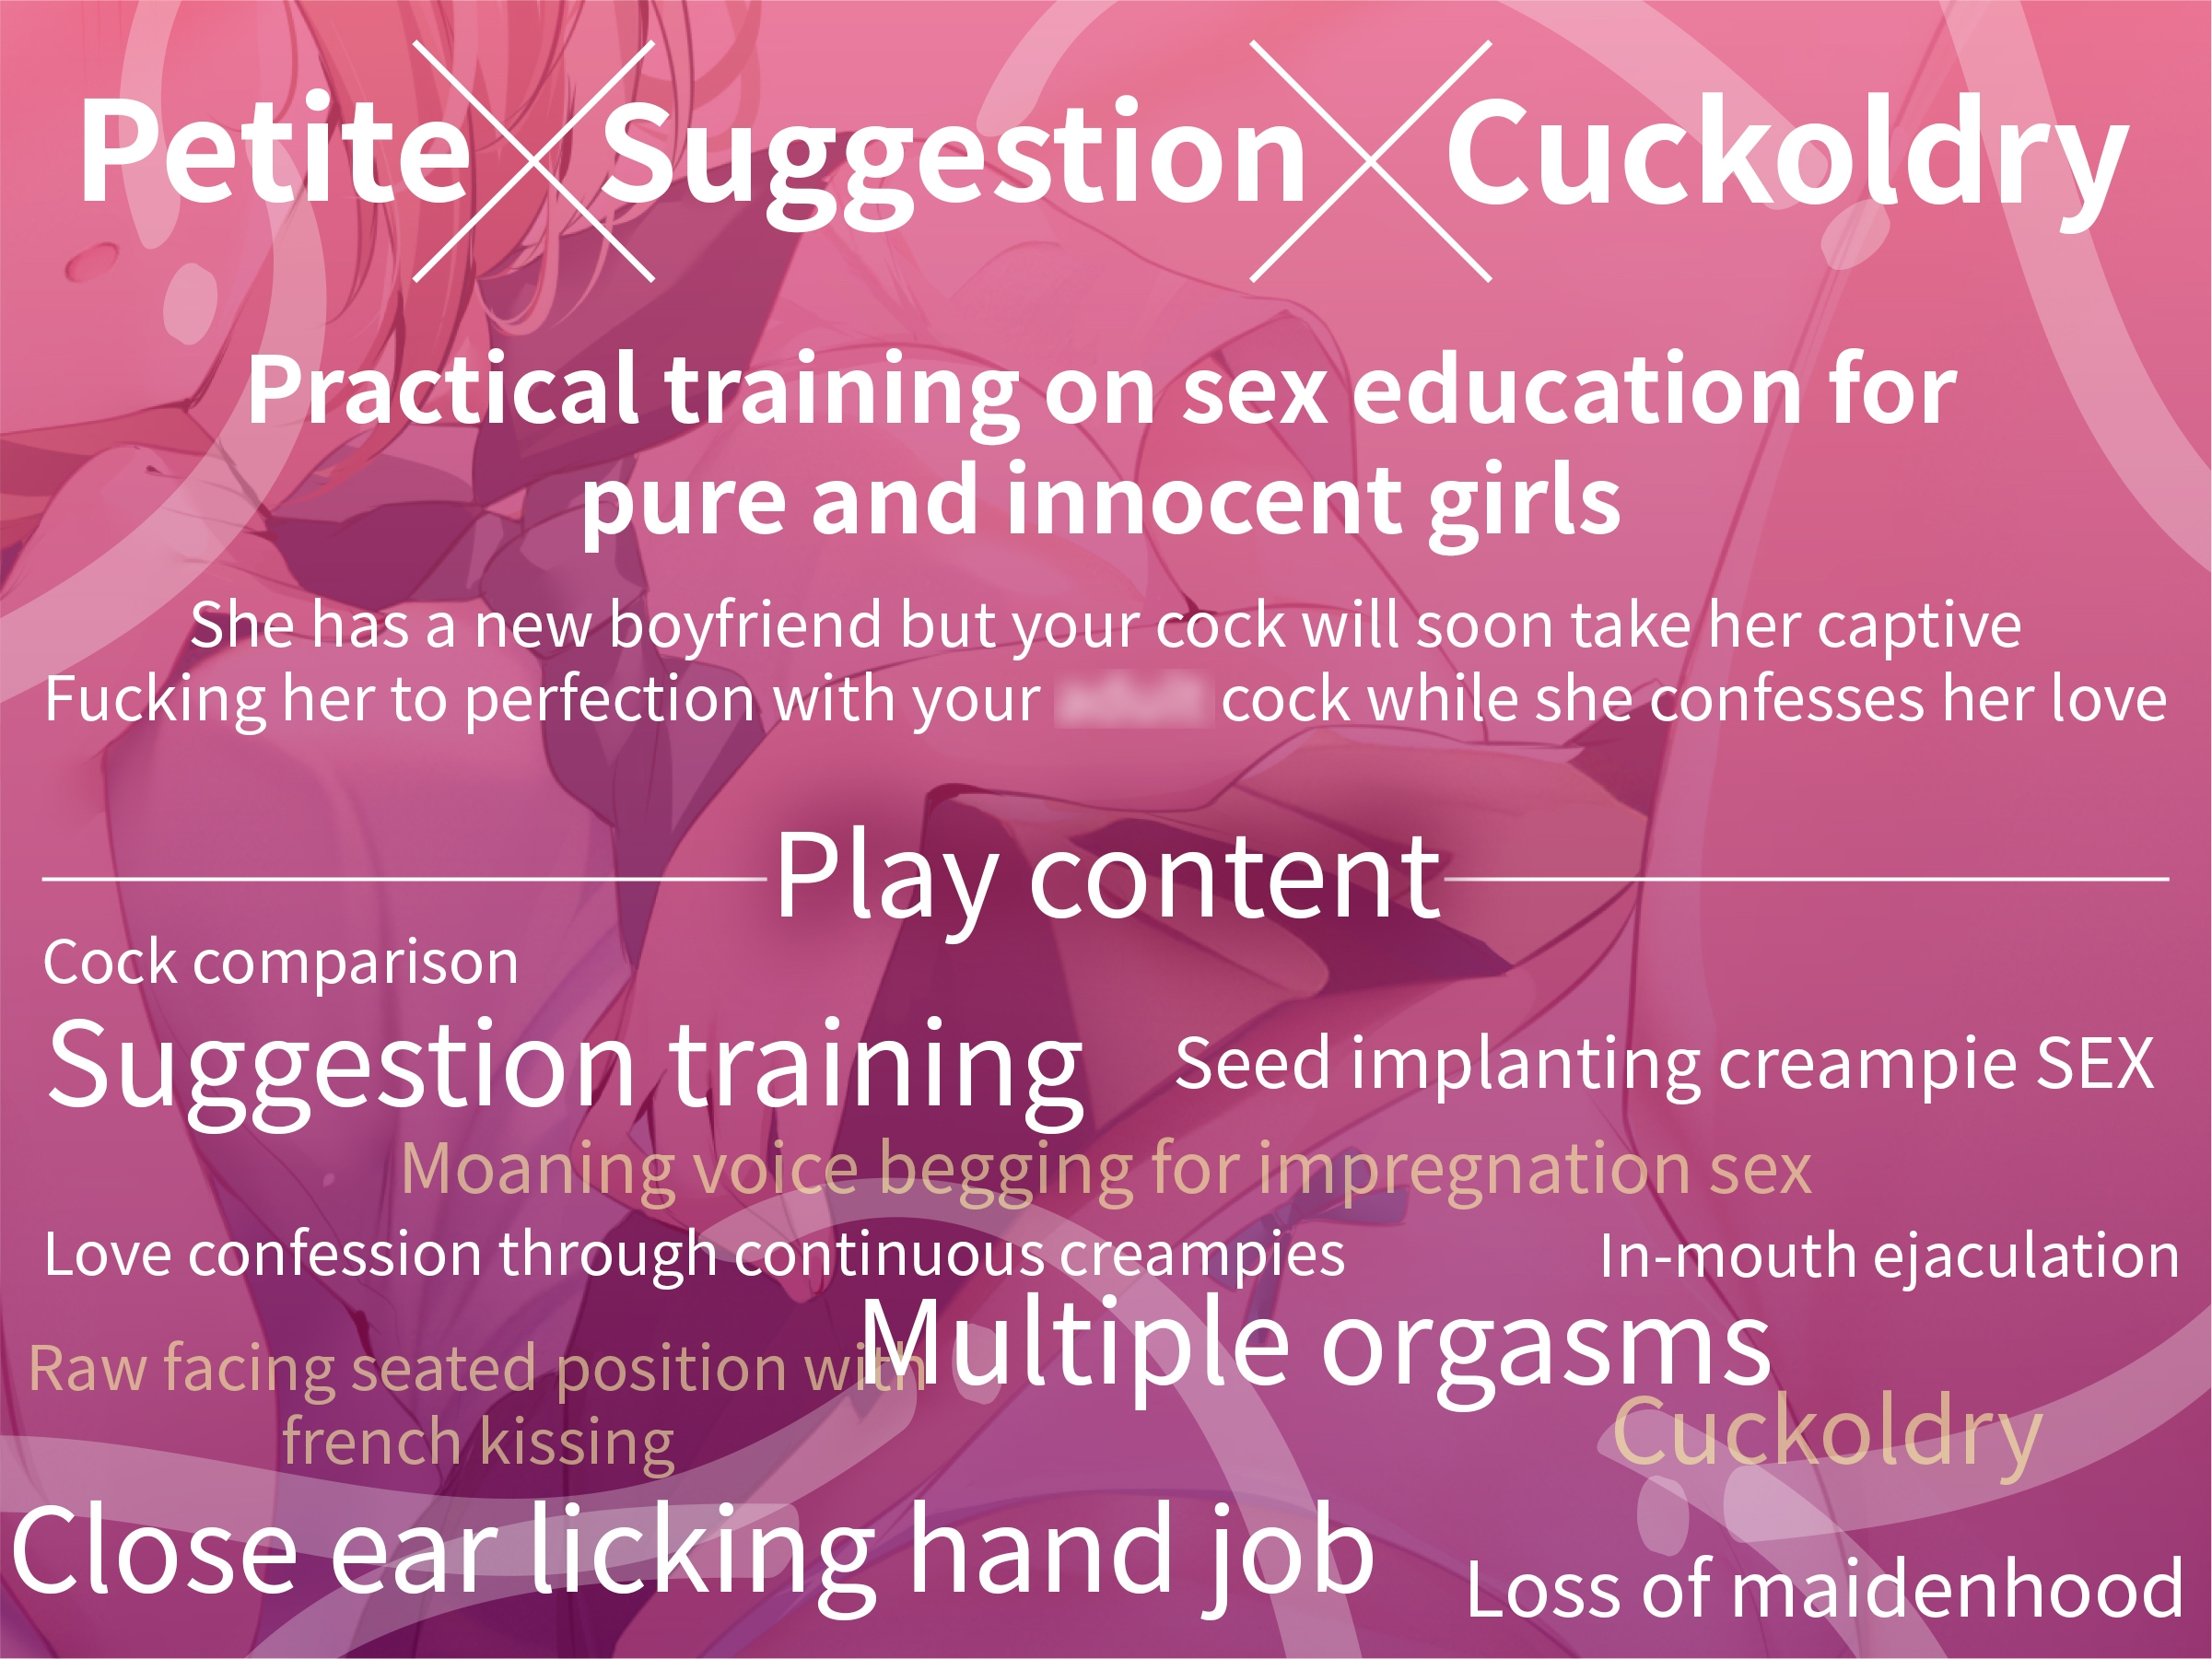 ENG Ver[Petite x Suggestion x Cuckoldry] Suggestion Sex Education Practical Training for Innocent Girls Using Suggestion Apps [密音色]